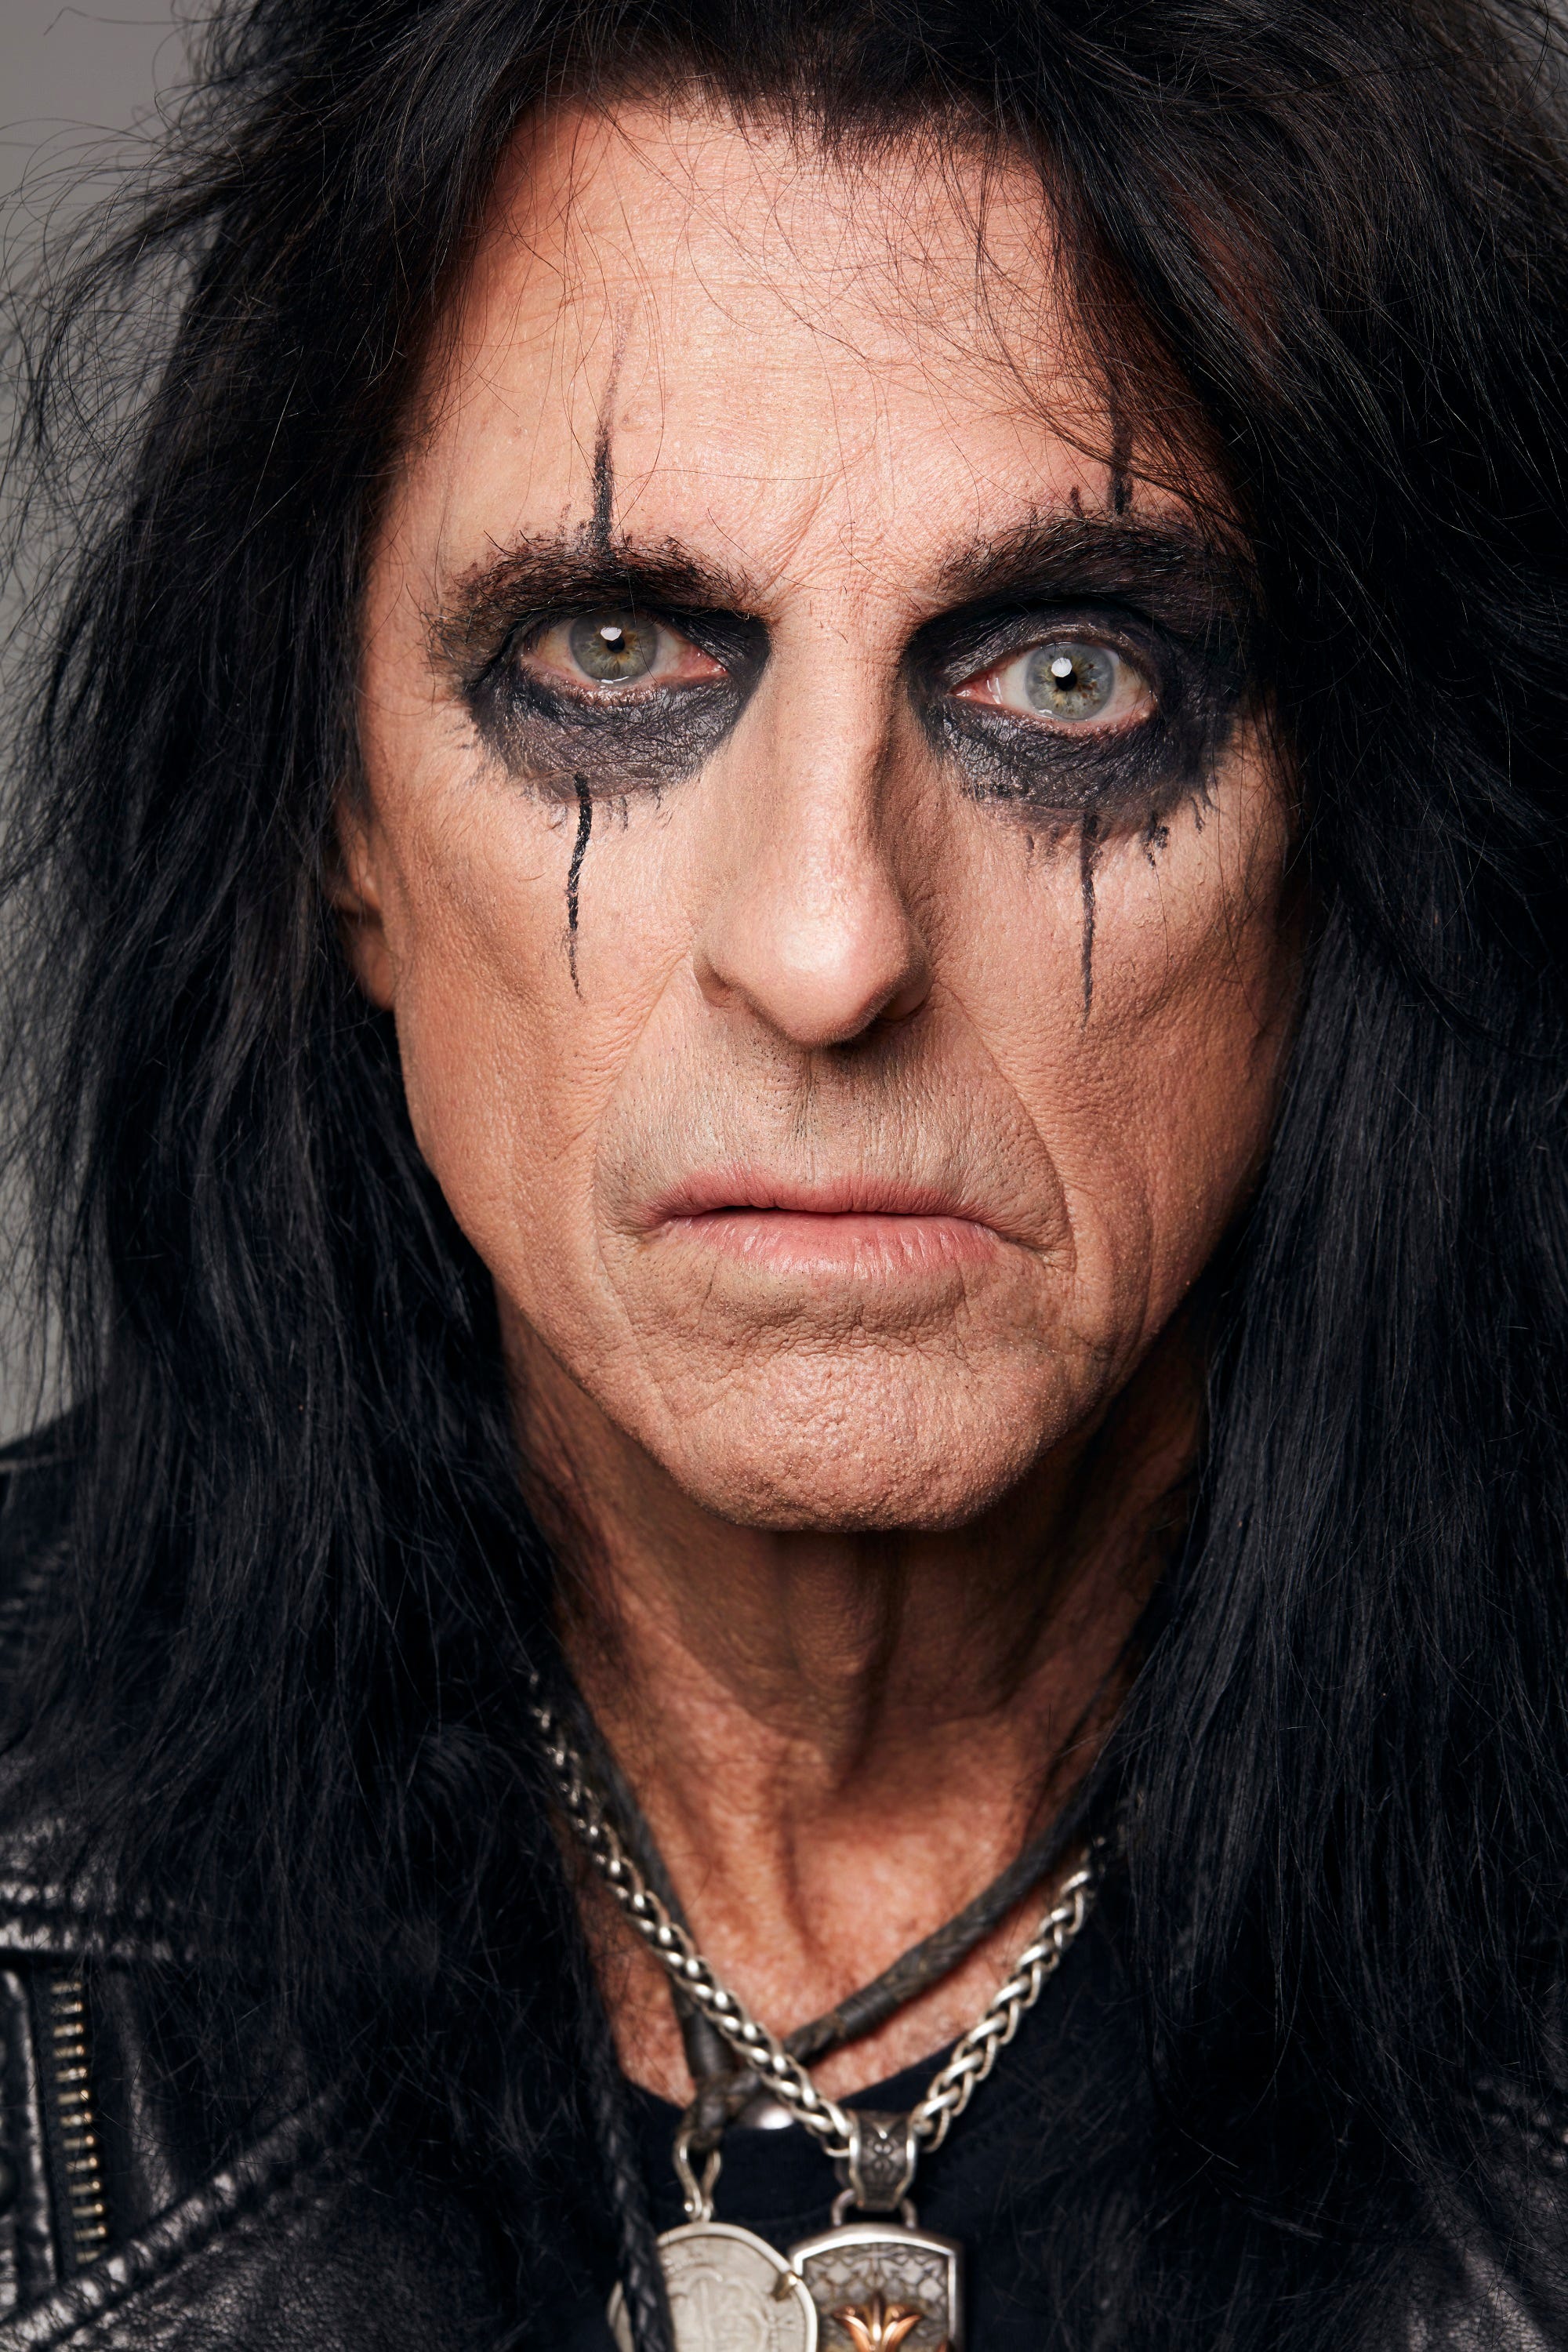 Alice Cooper band contests, getting COVID-19 and more